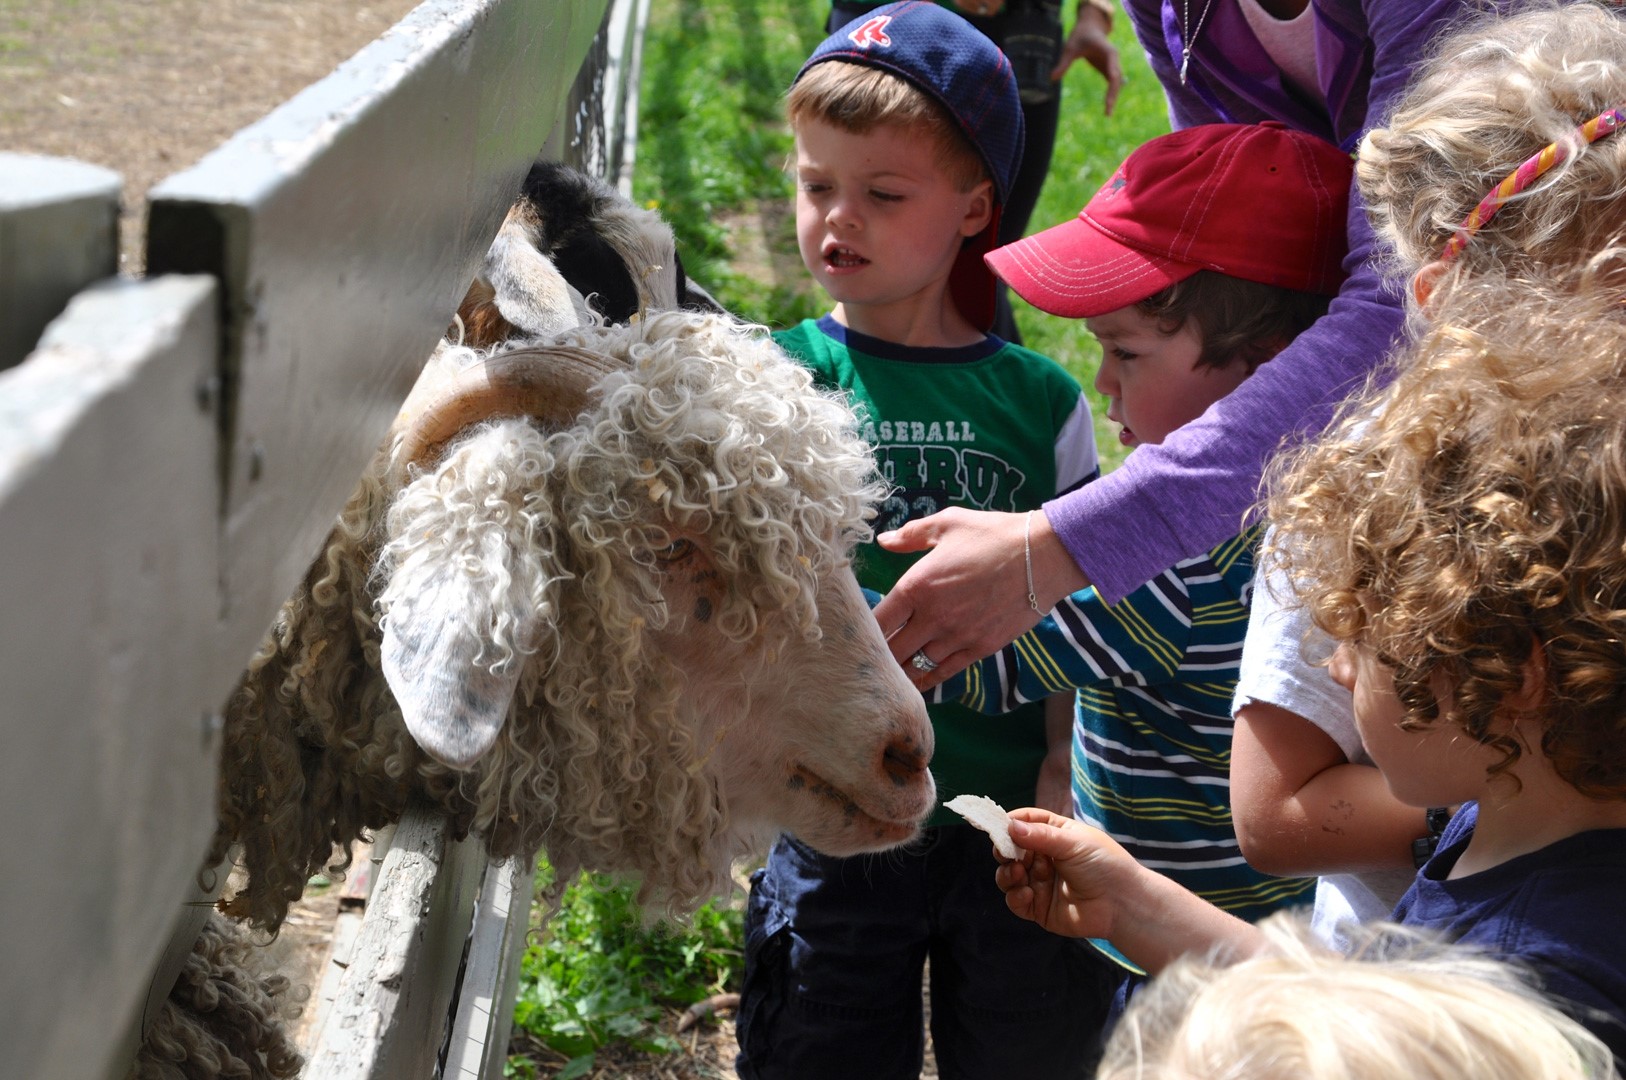 Several children crowding around a goat pen petting, looking at, and attempting to feed a potato chip to a woolly goat sticking its head through the fence.